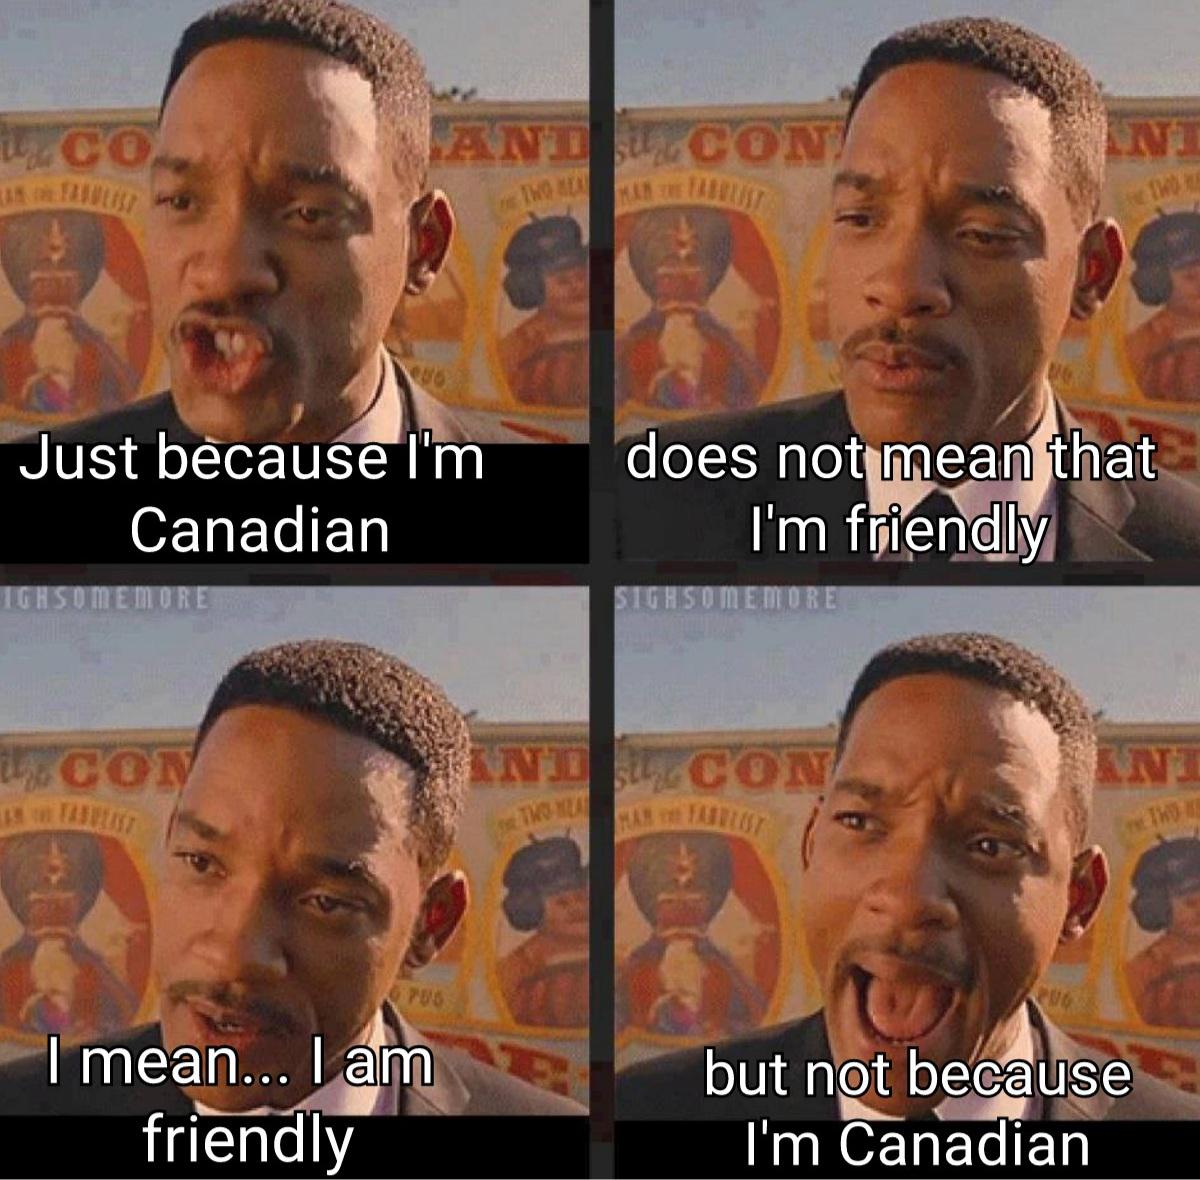 dank memes - funny memes - will smith meme template - Ico Land.Con In Two Two Just because I'm Canadian does not mean that I'm friendly Ghsome More Stgh Some More 24.Com Indiacon In Toma Ctwo P06 I mean... I am friendly but not because I'm Canadian